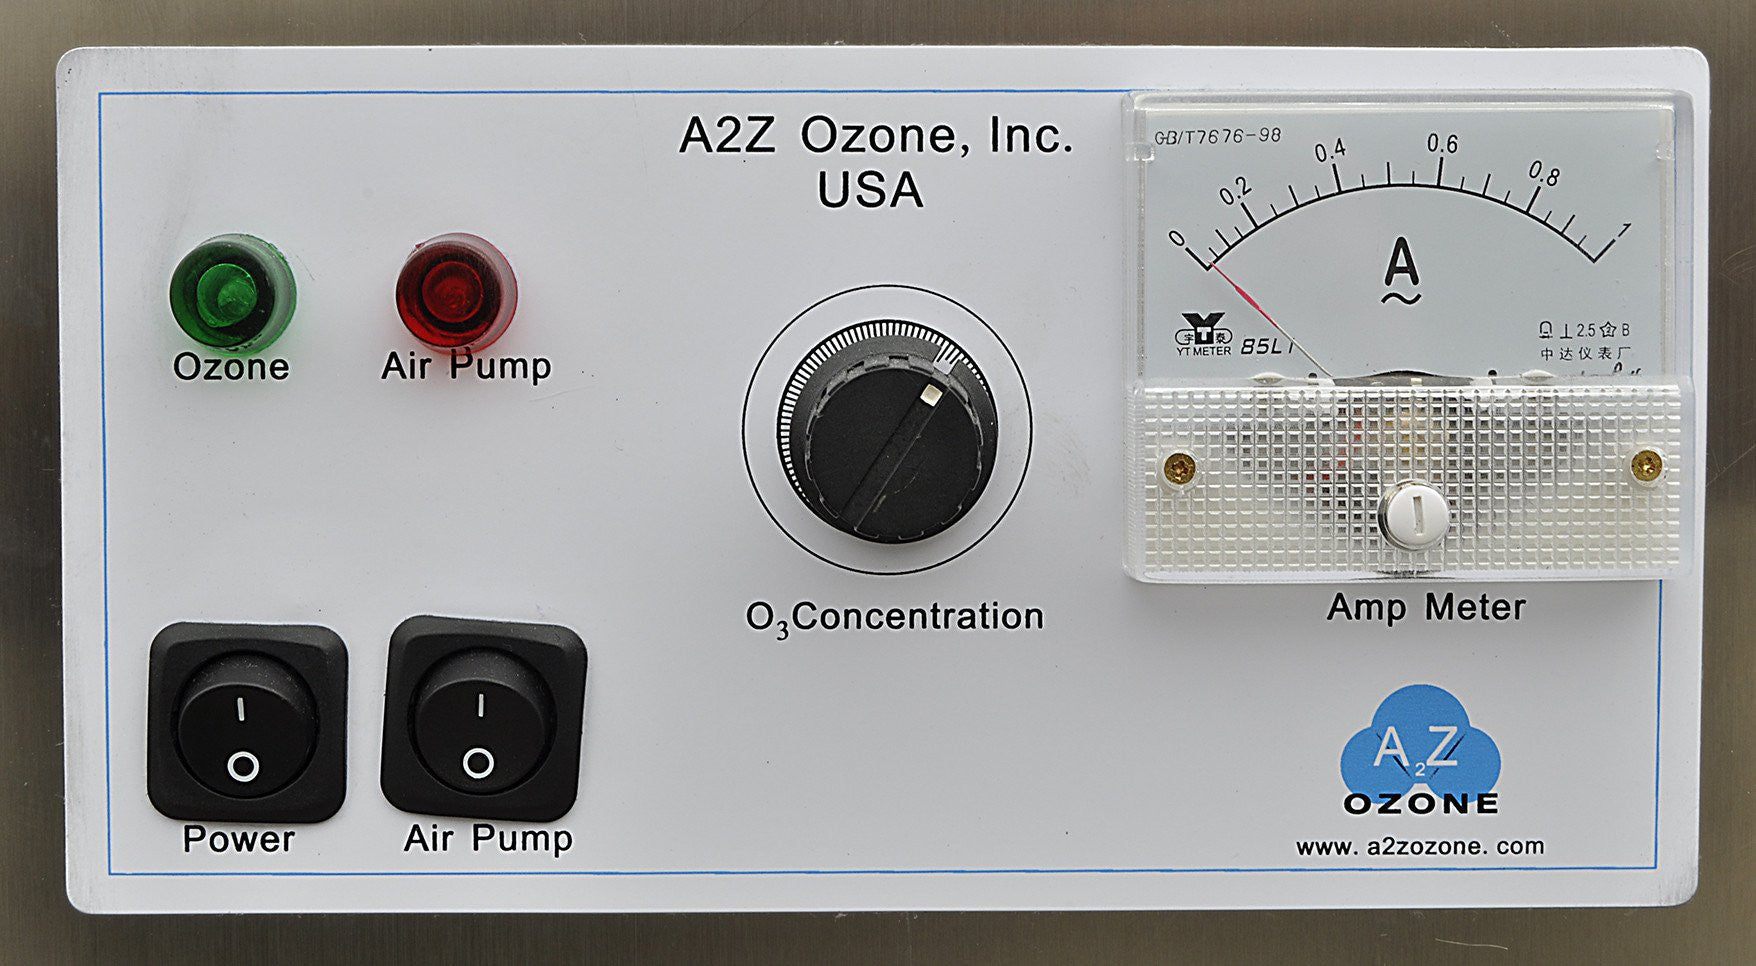 Z-7 G commercial ozone generator control panel